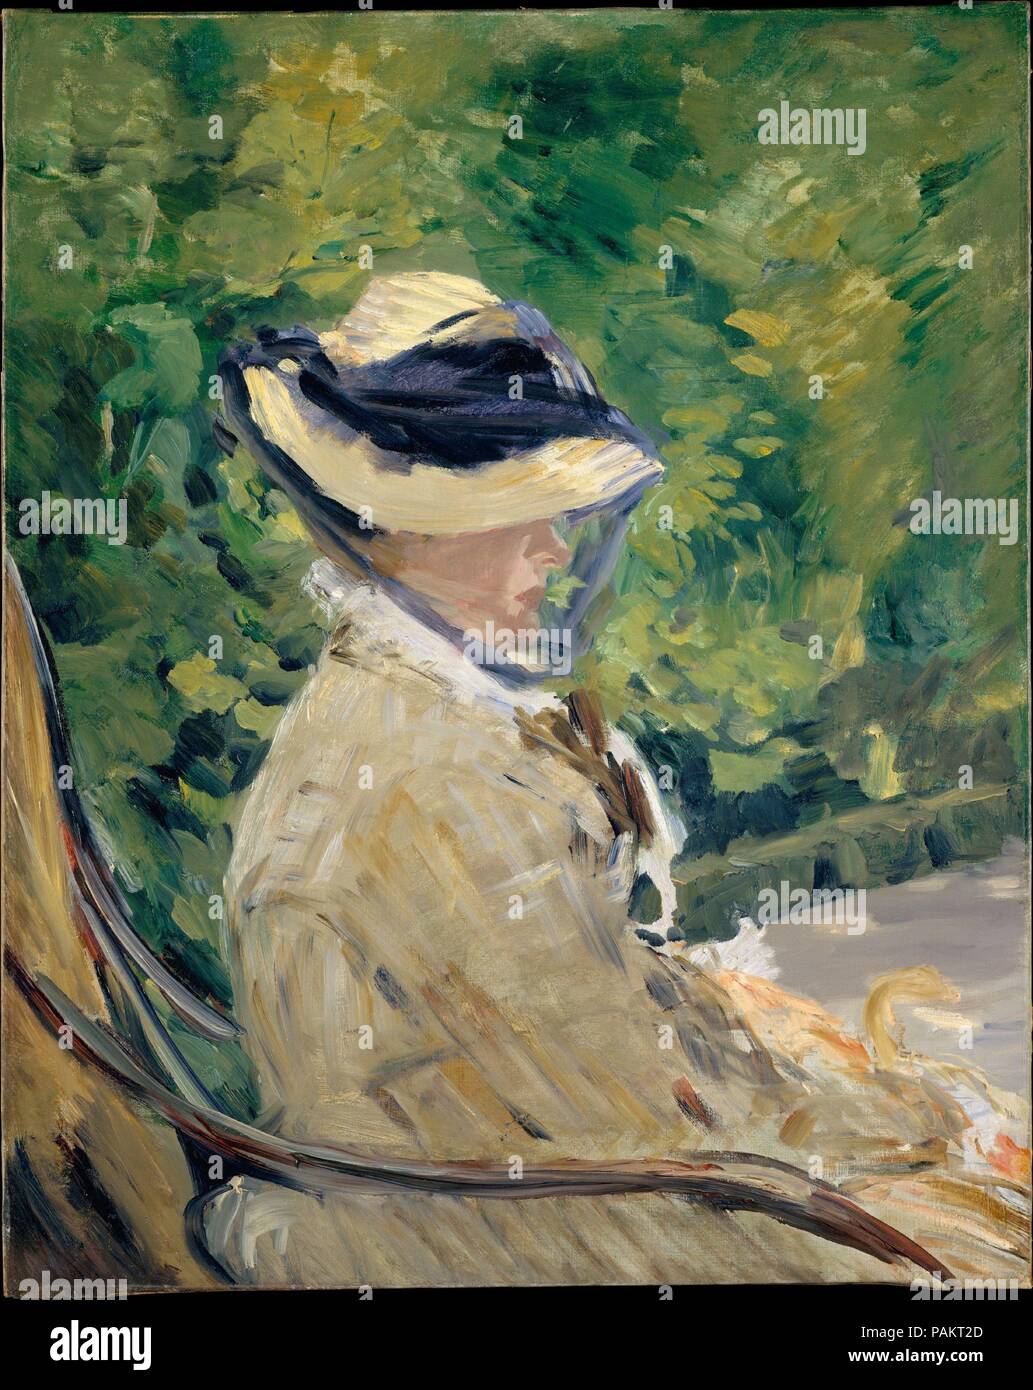 Madame Manet (Suzanne Leenhoff, 1830-1906) at Bellevue. Artist: Édouard Manet (French, Paris 1832-1883 Paris). Dimensions: 31 3/4 x 23 3/4 in. (80.6 x 60.3 cm). Date: 1880.  Despite the seemingly rapid brushwork and the summary treatment of detail, this painting was preceded by at least two drawings and an oil sketch. This is Manet's last portrait of his wife; it was painted at Bellevue, a suburb of Paris, where they spent the summer of 1880. Museum: Metropolitan Museum of Art, New York, USA. Stock Photo